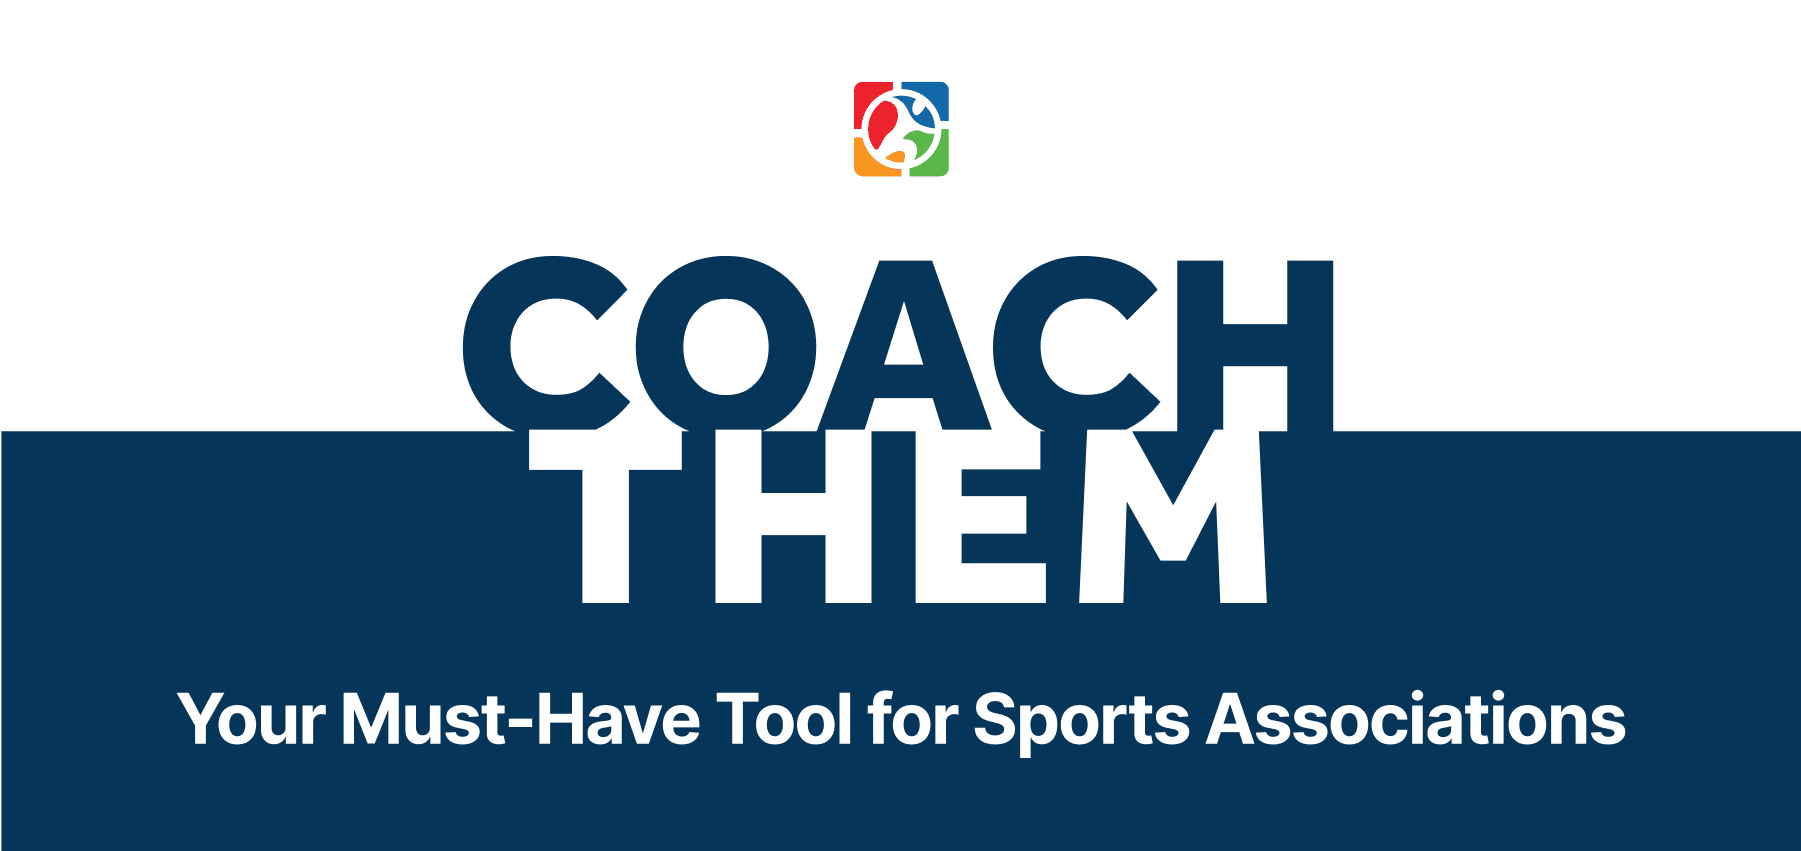 CoachThem: Your Must-Have Tool for Sports Associations